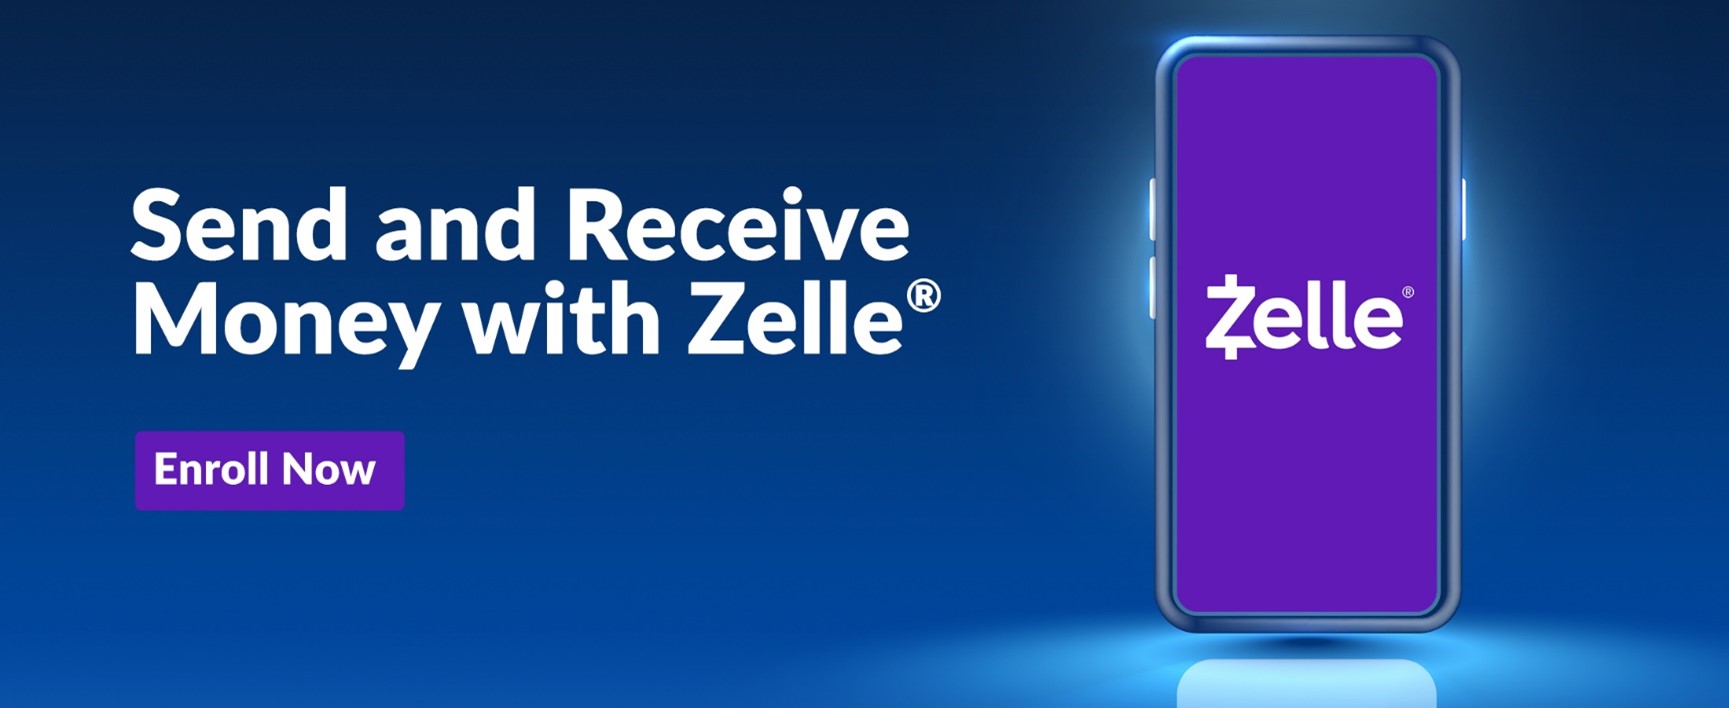 Send and receive money with Zelle.  Enroll Now